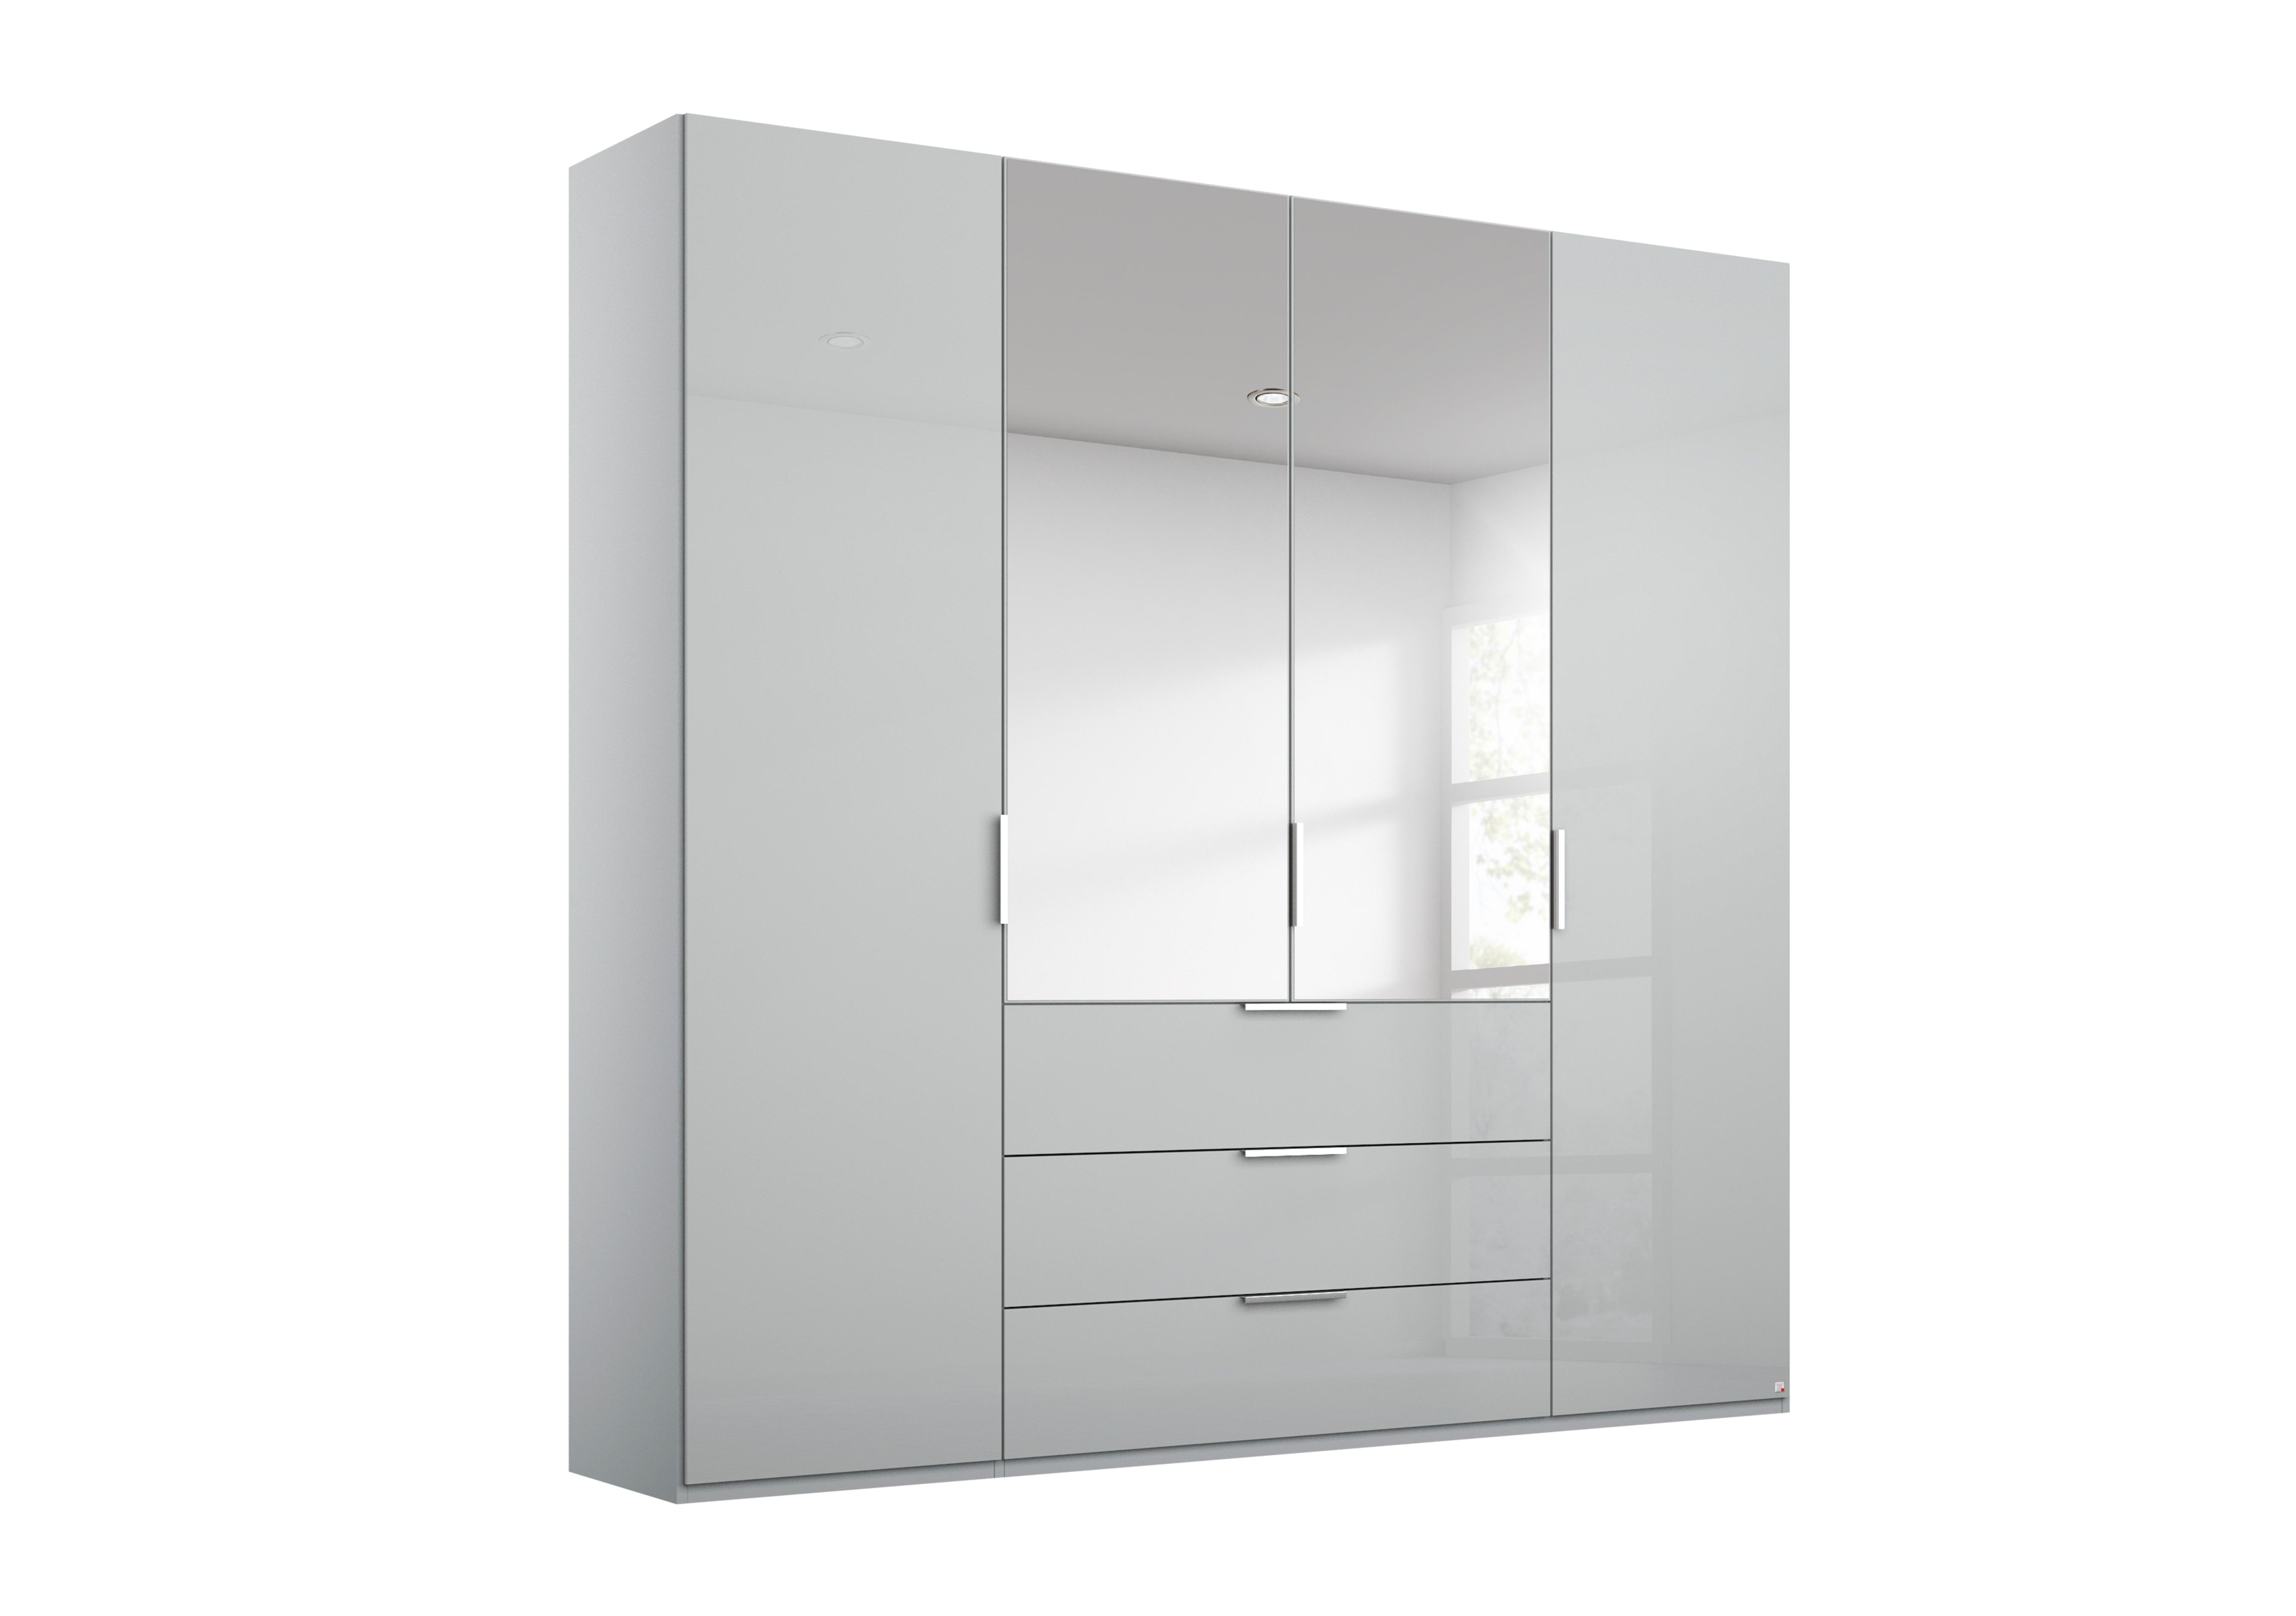 Formes Glass 4 Door Combo Hinged Wardrobe with 2 Mirrors and Drawers in A145b Silk Grey Silk Grey Frnt on Furniture Village